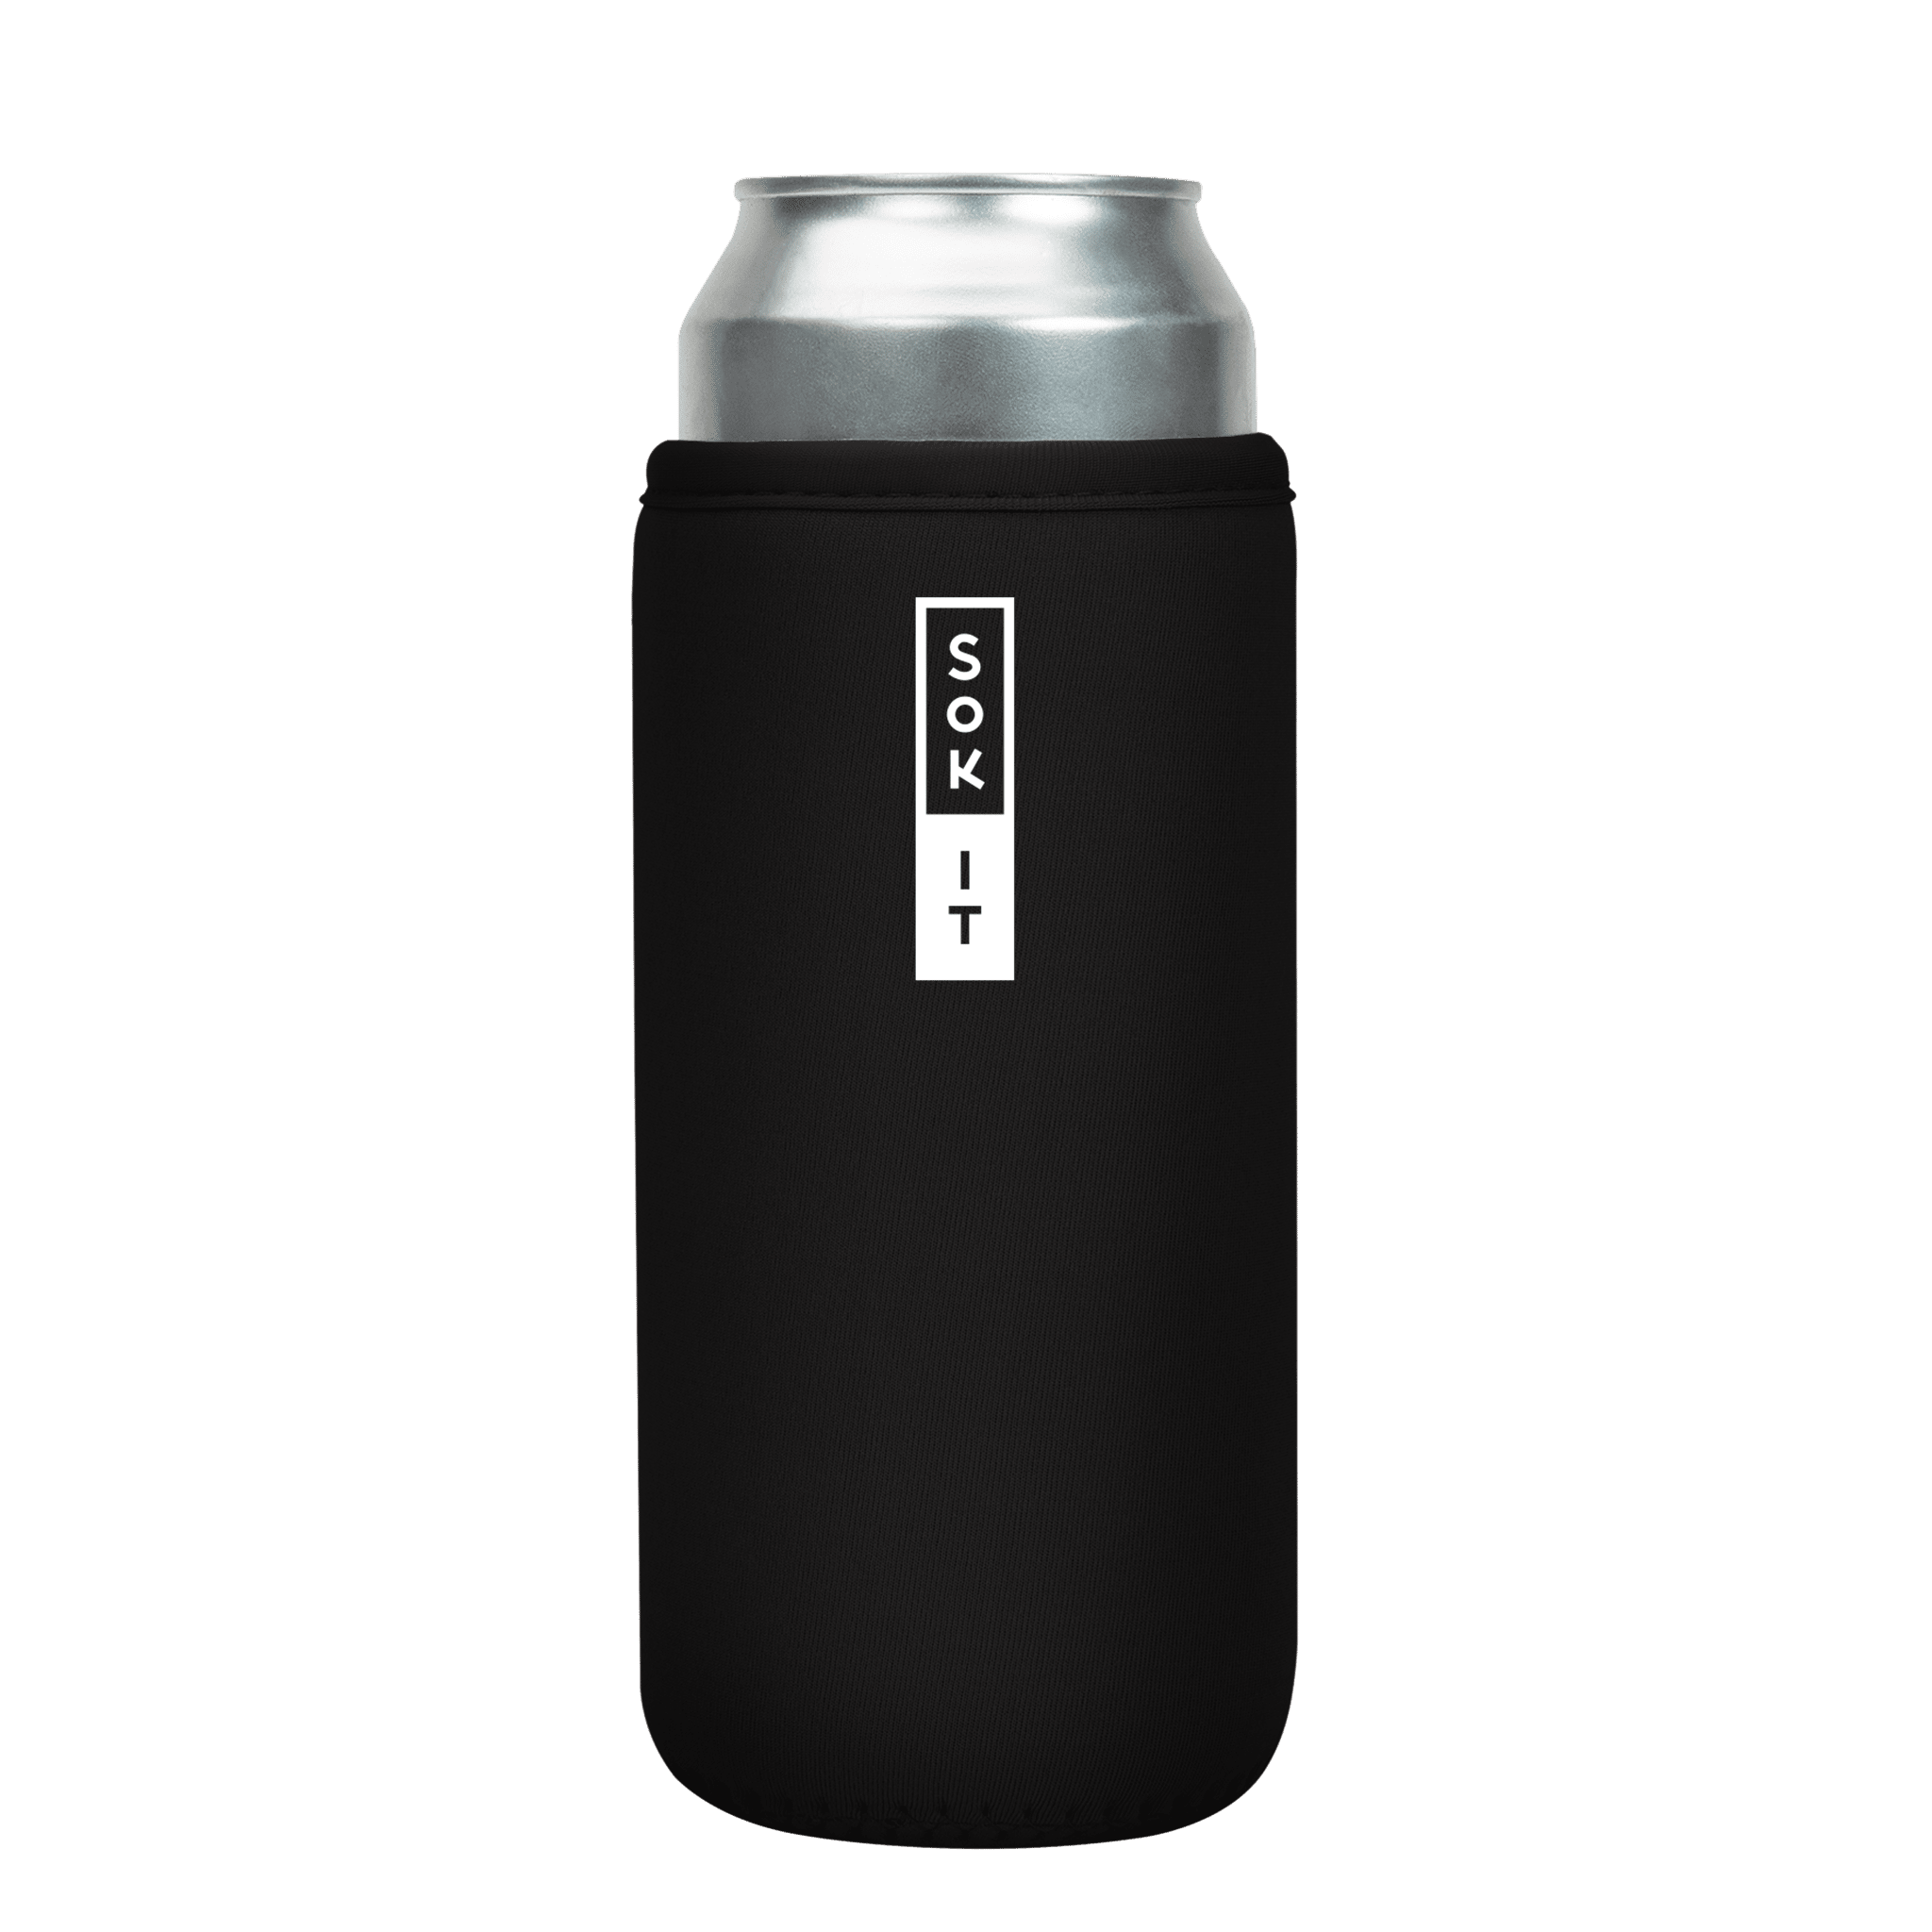 CanSok Black 25oz Can